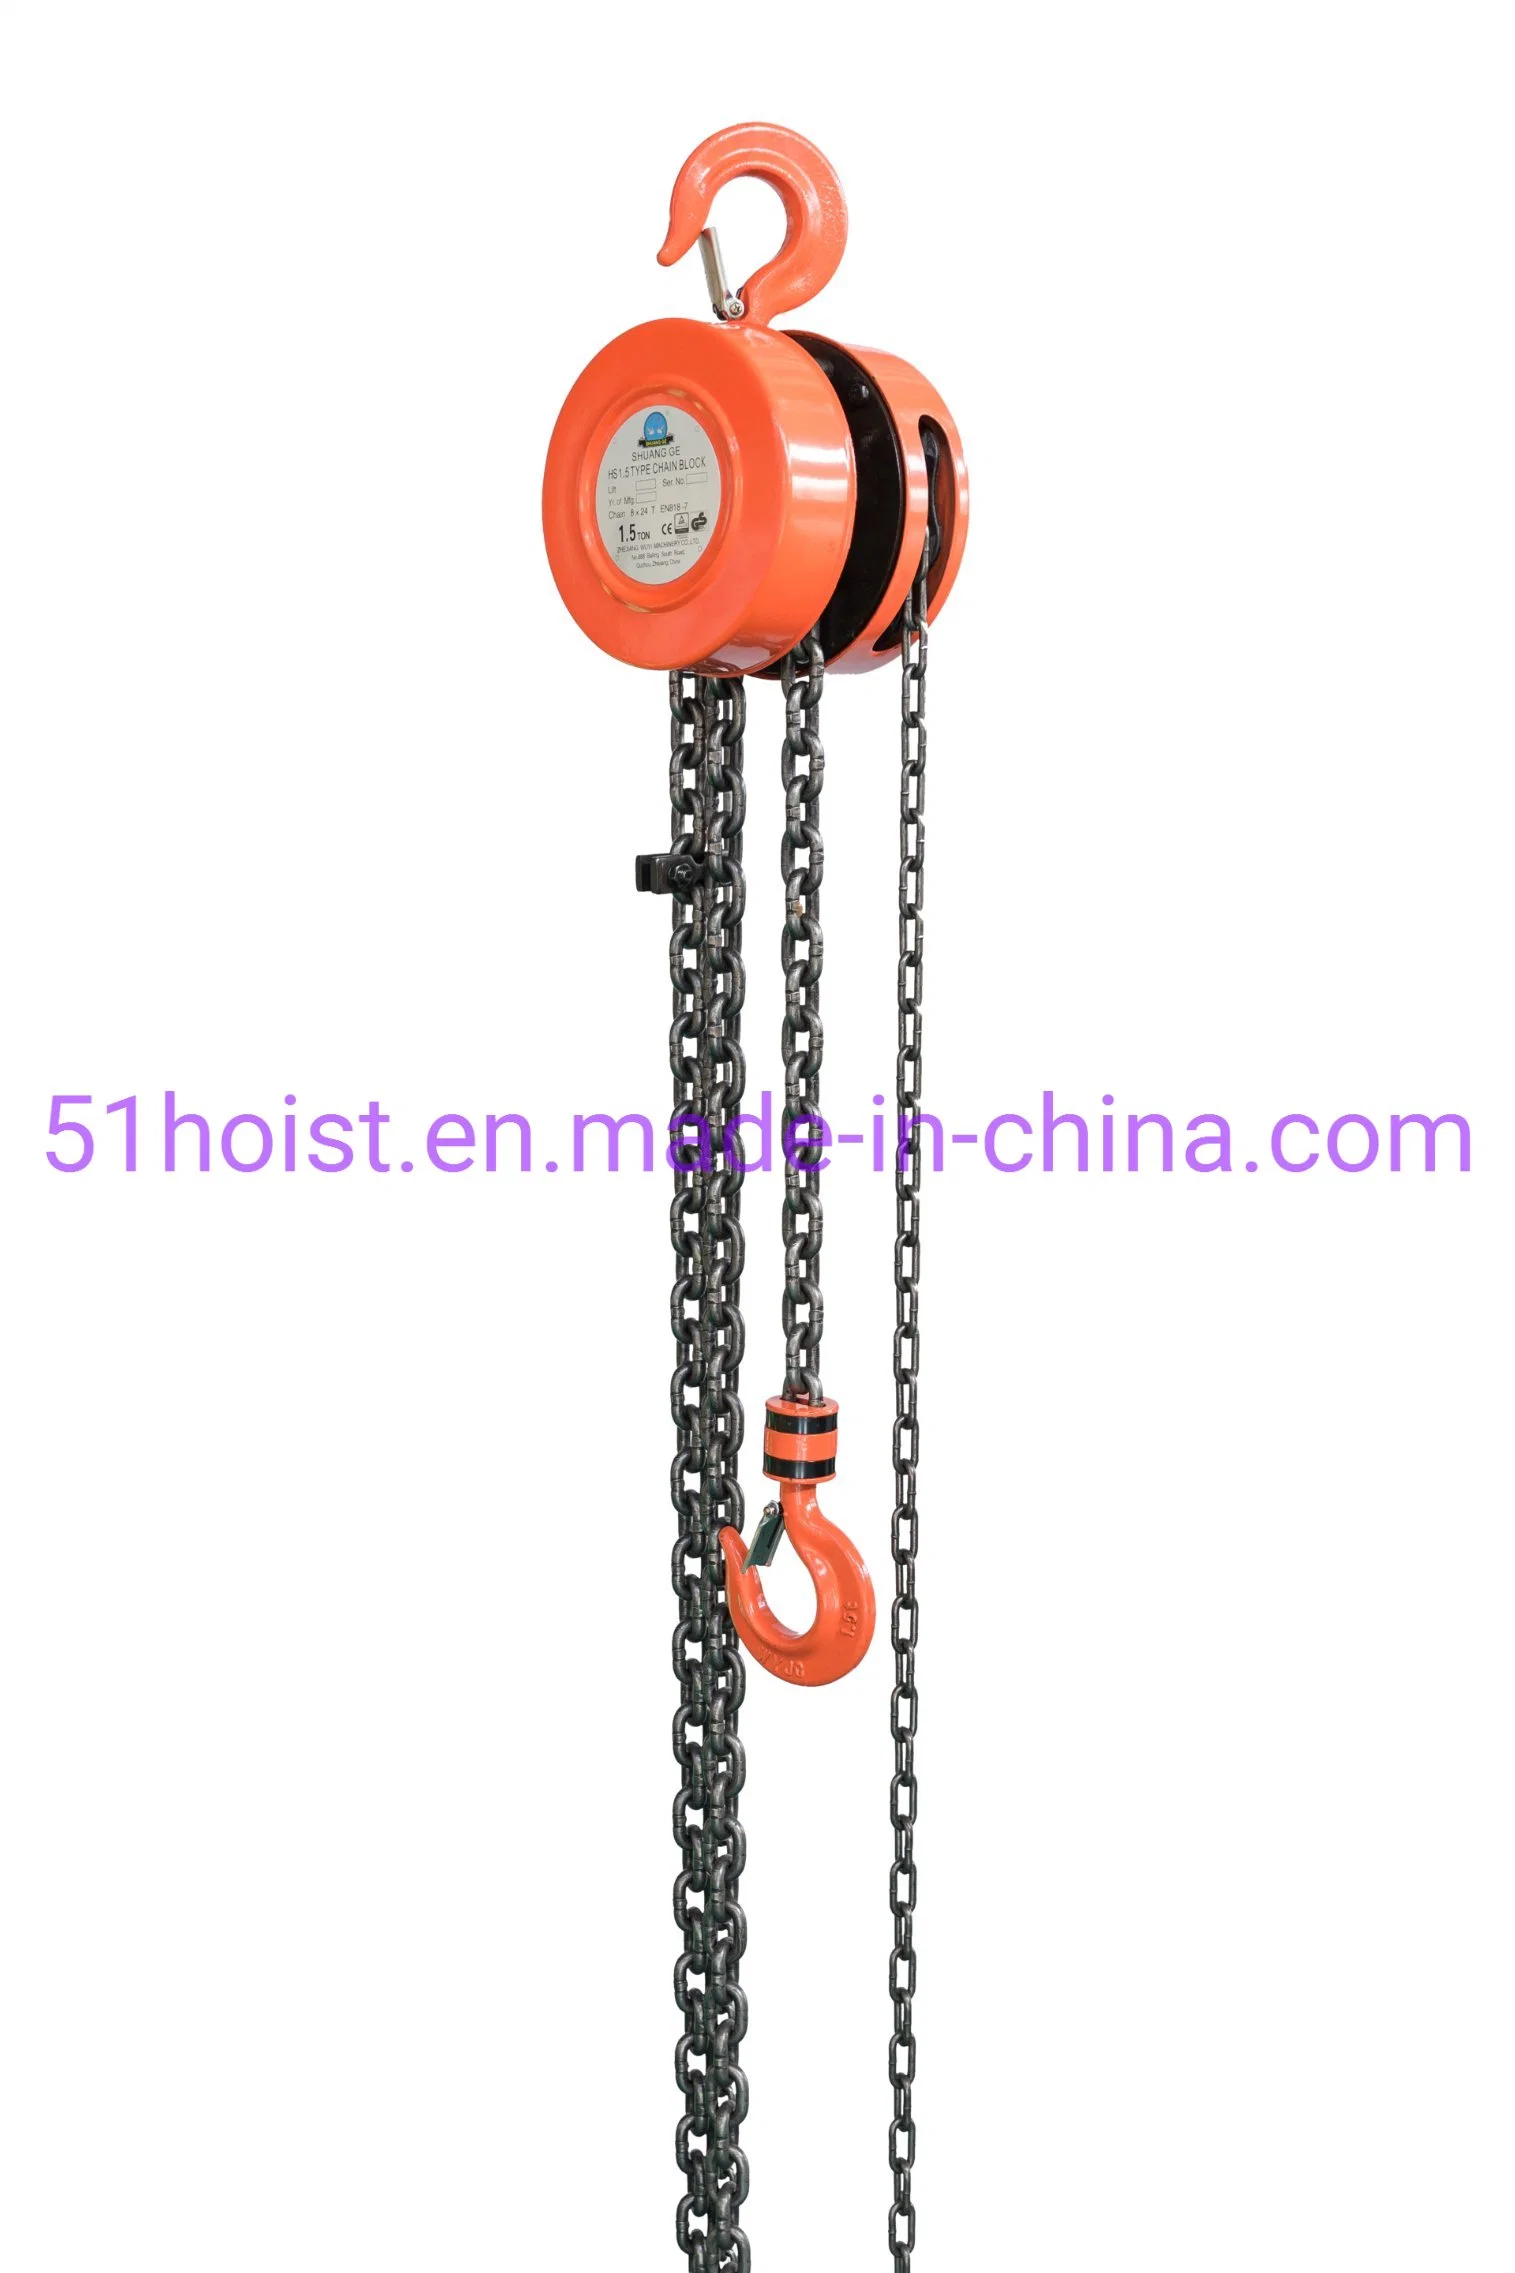 1 Tonne 1000kg Capacity Chain Hand Pulley Lifting Block